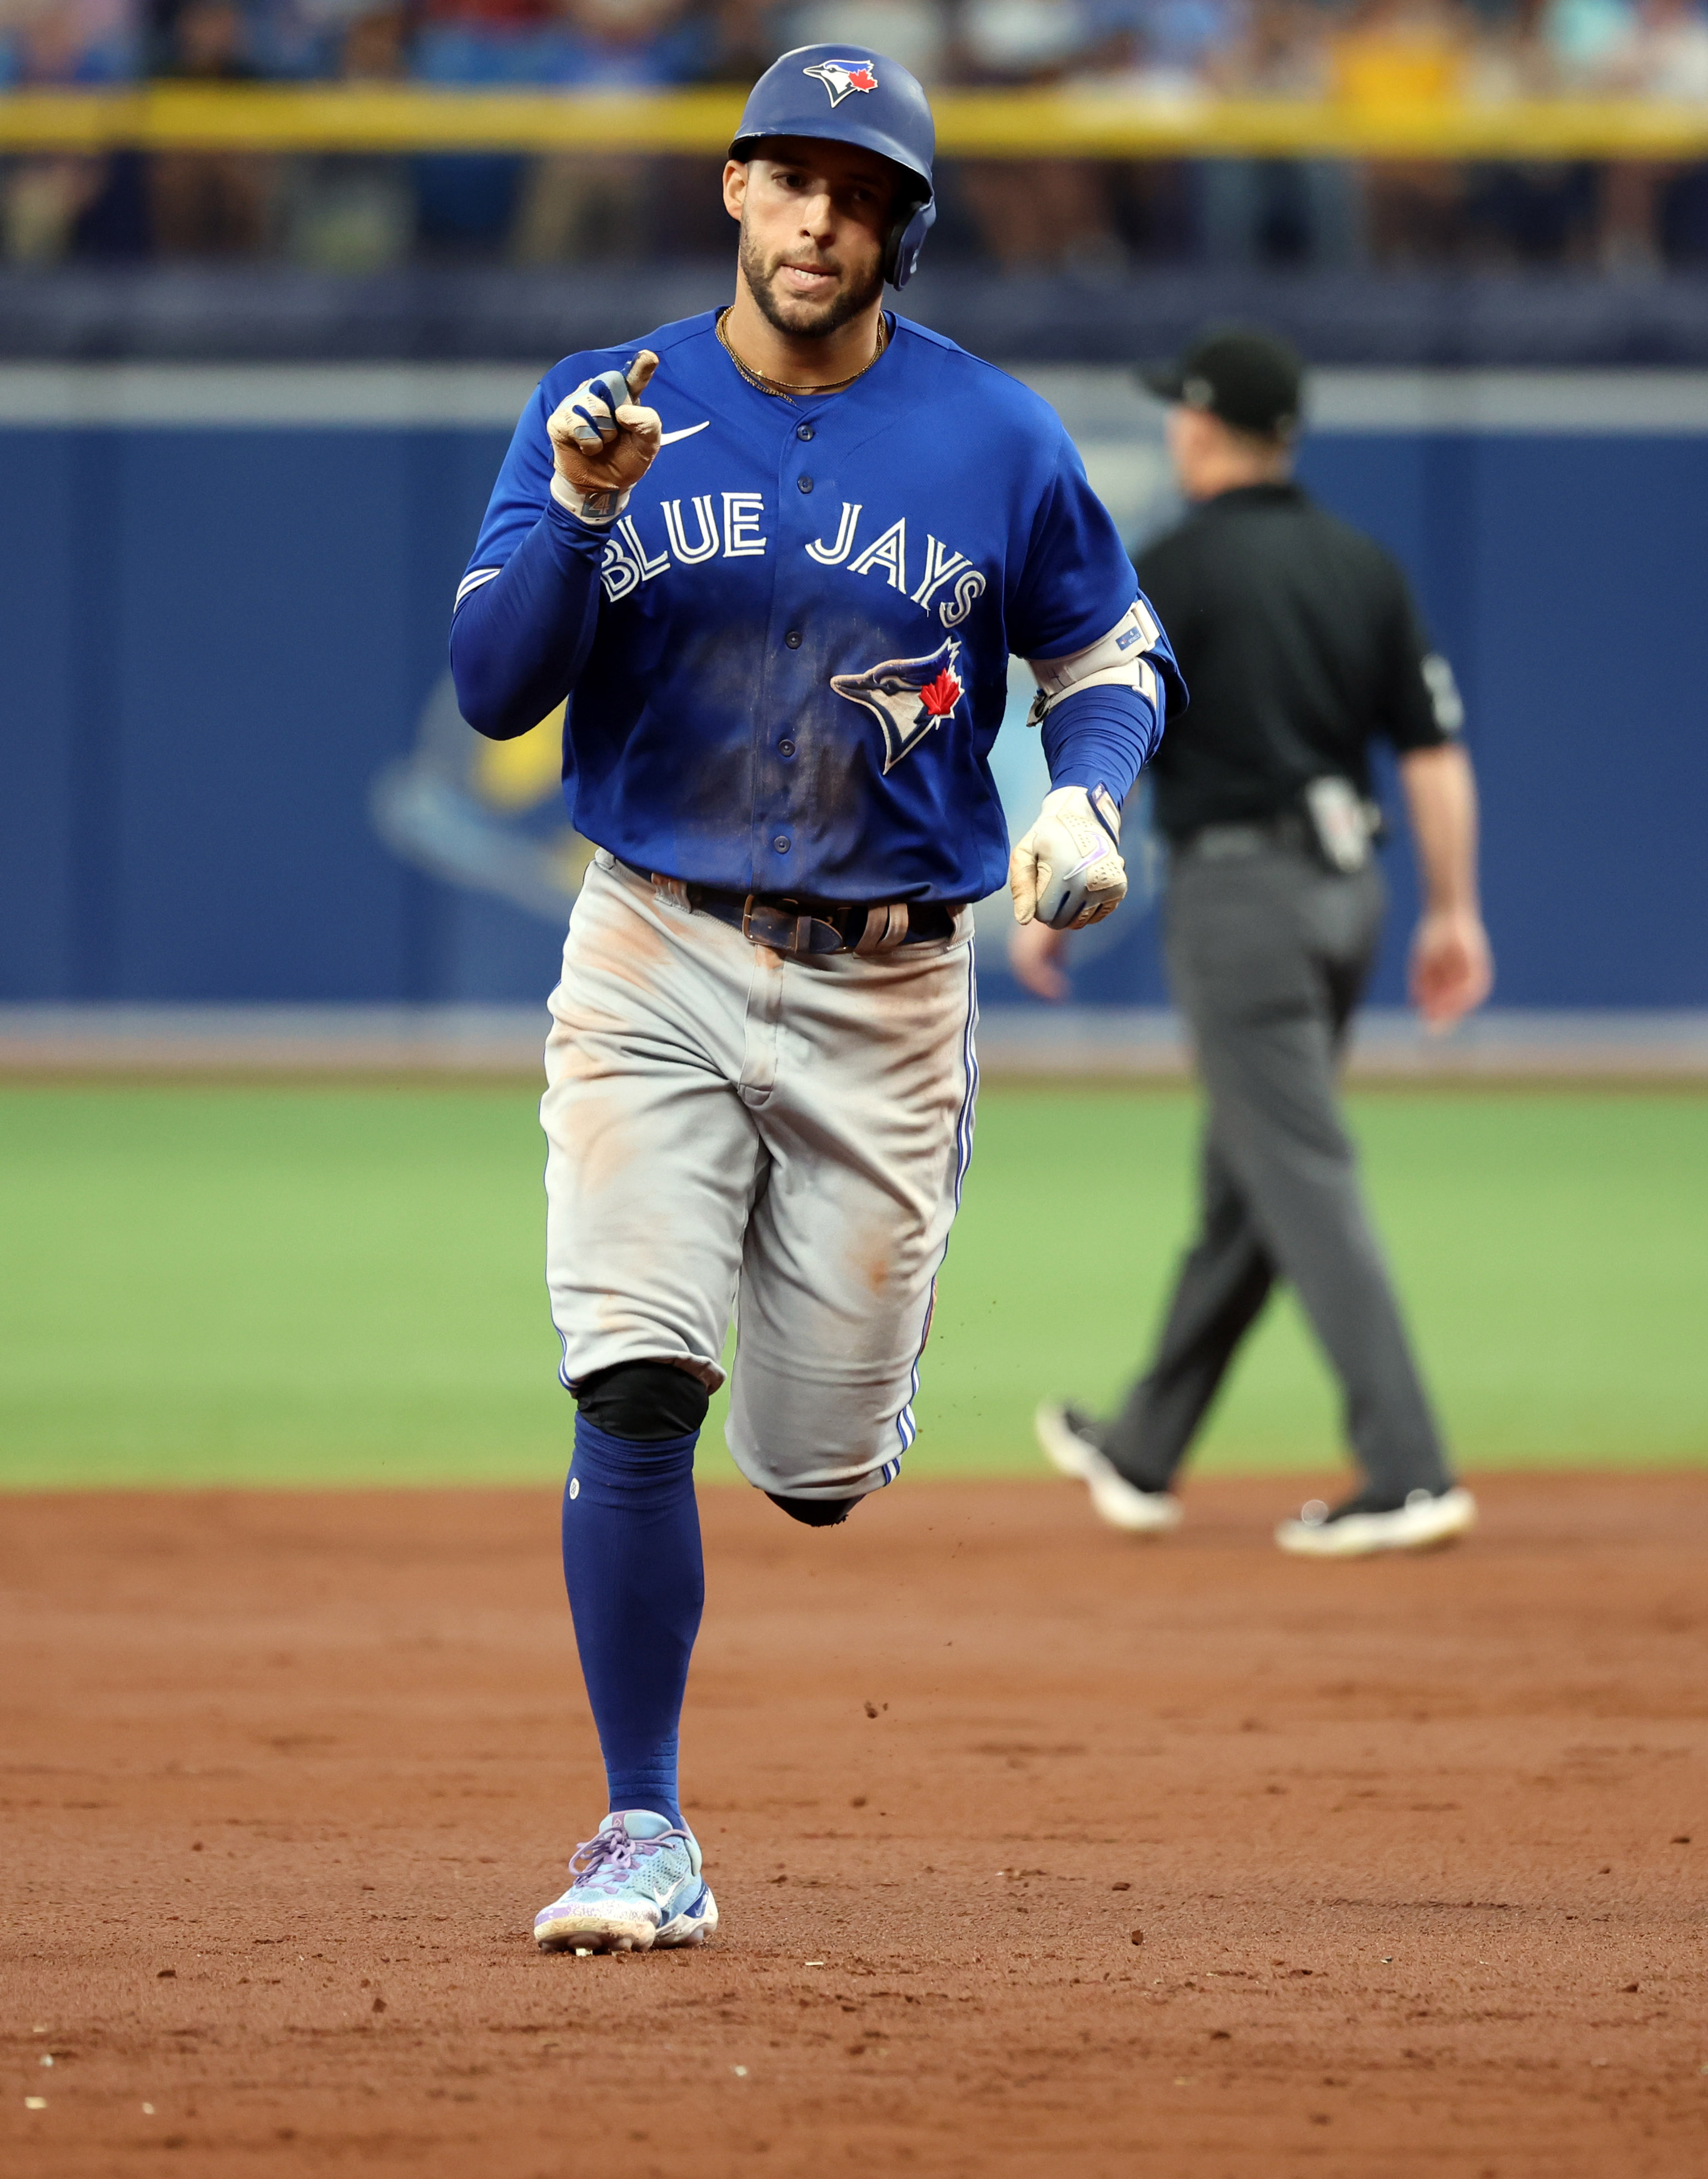 Blue Jays pile up 20 runs in rout of Rays